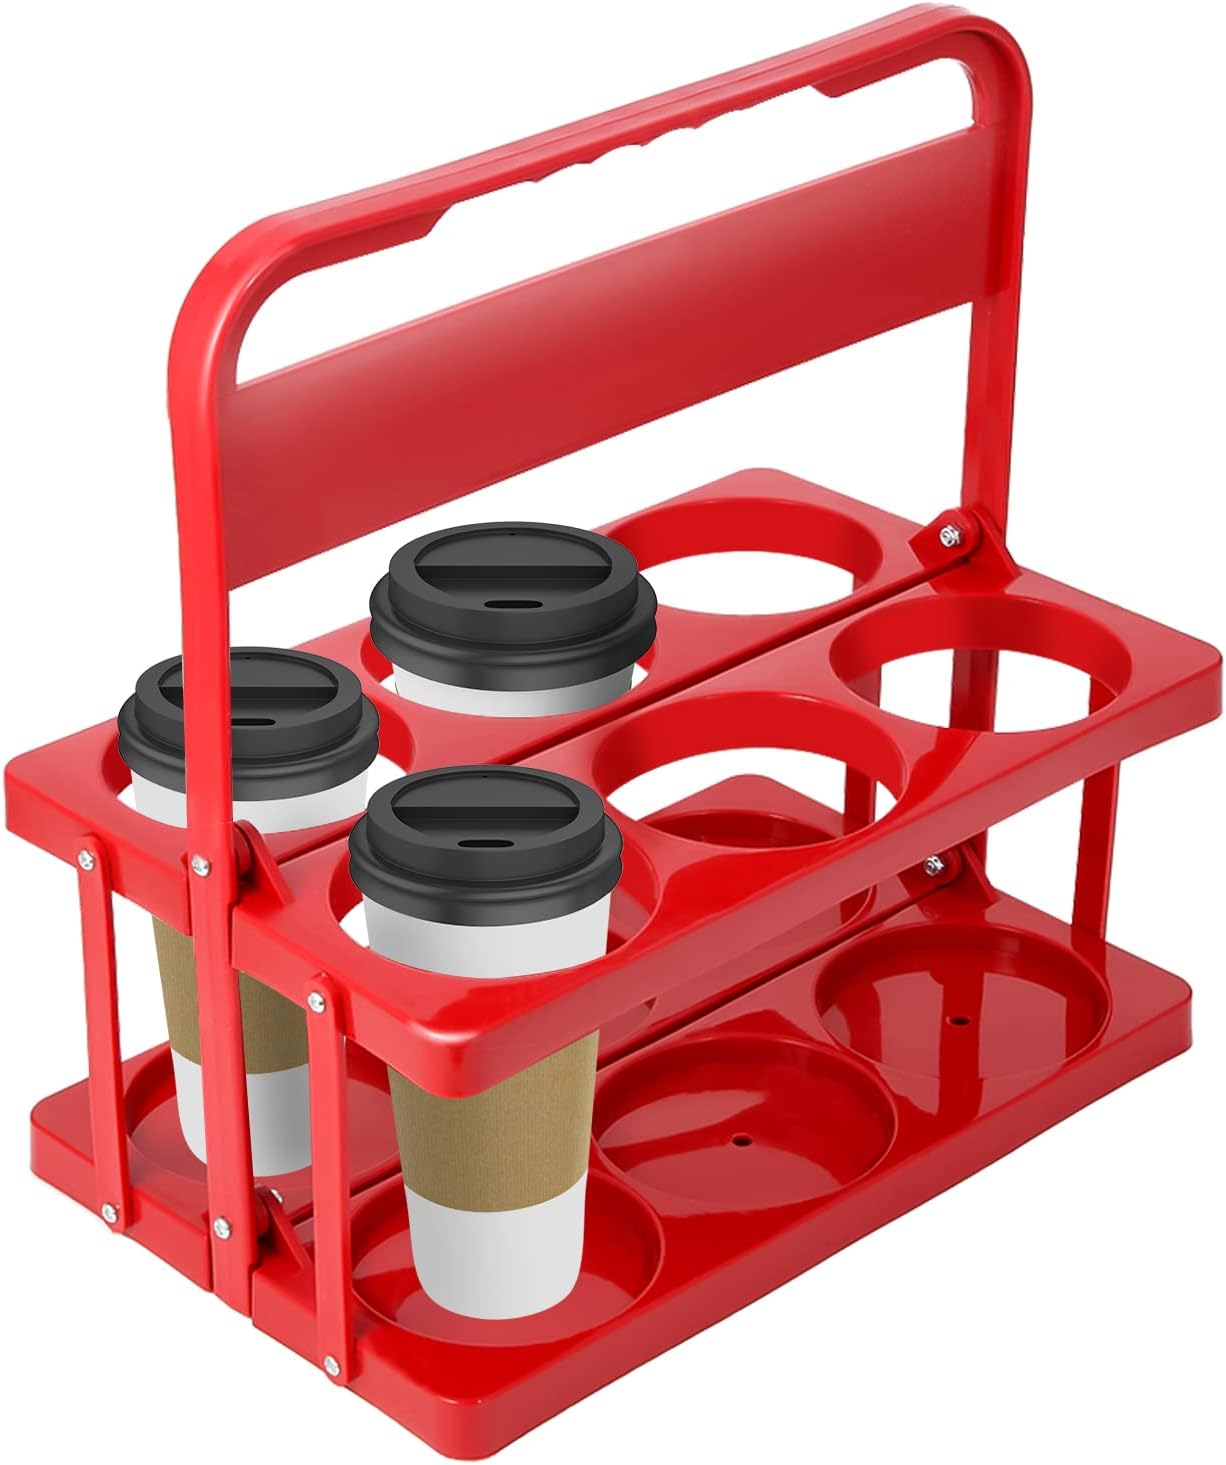 🔥Last Day 49% OFF - Portable Drink Carrier for Big Cups